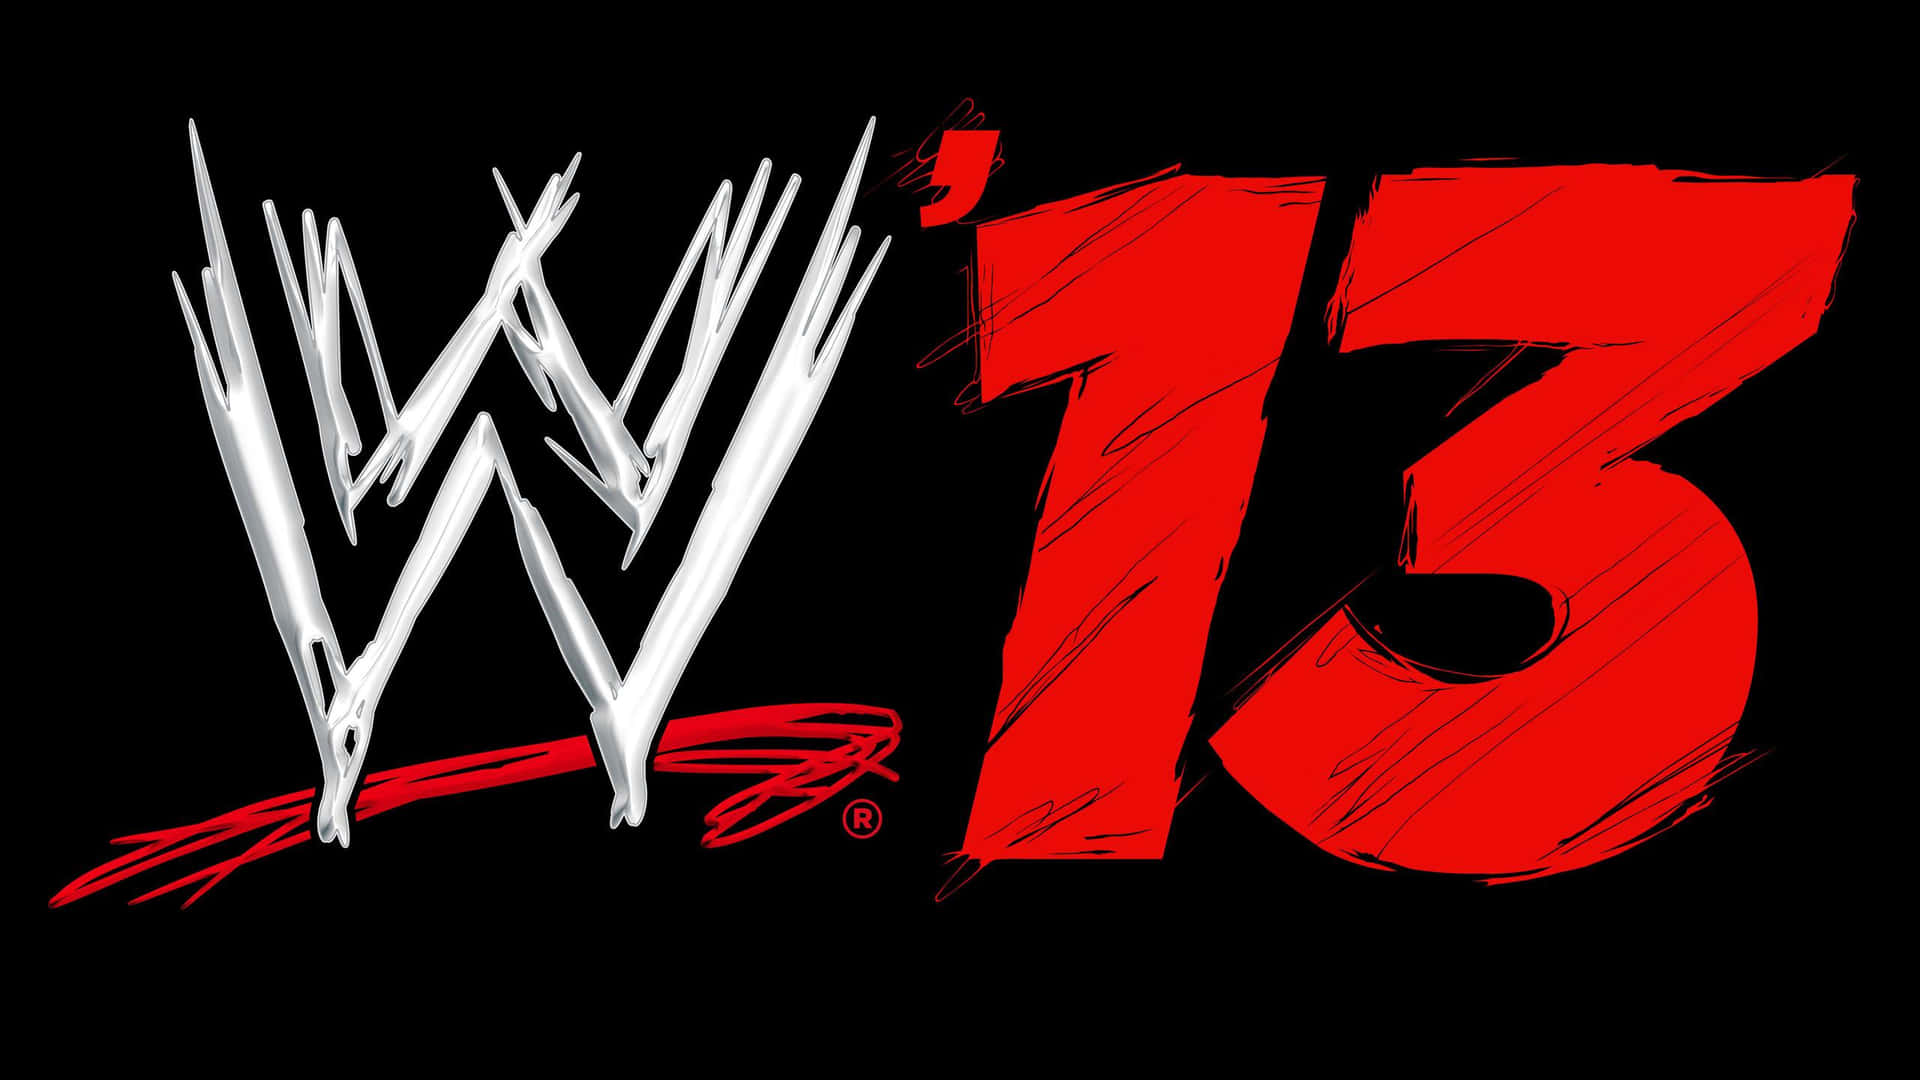 Exciting WWE Logo in High Resolution Wallpaper